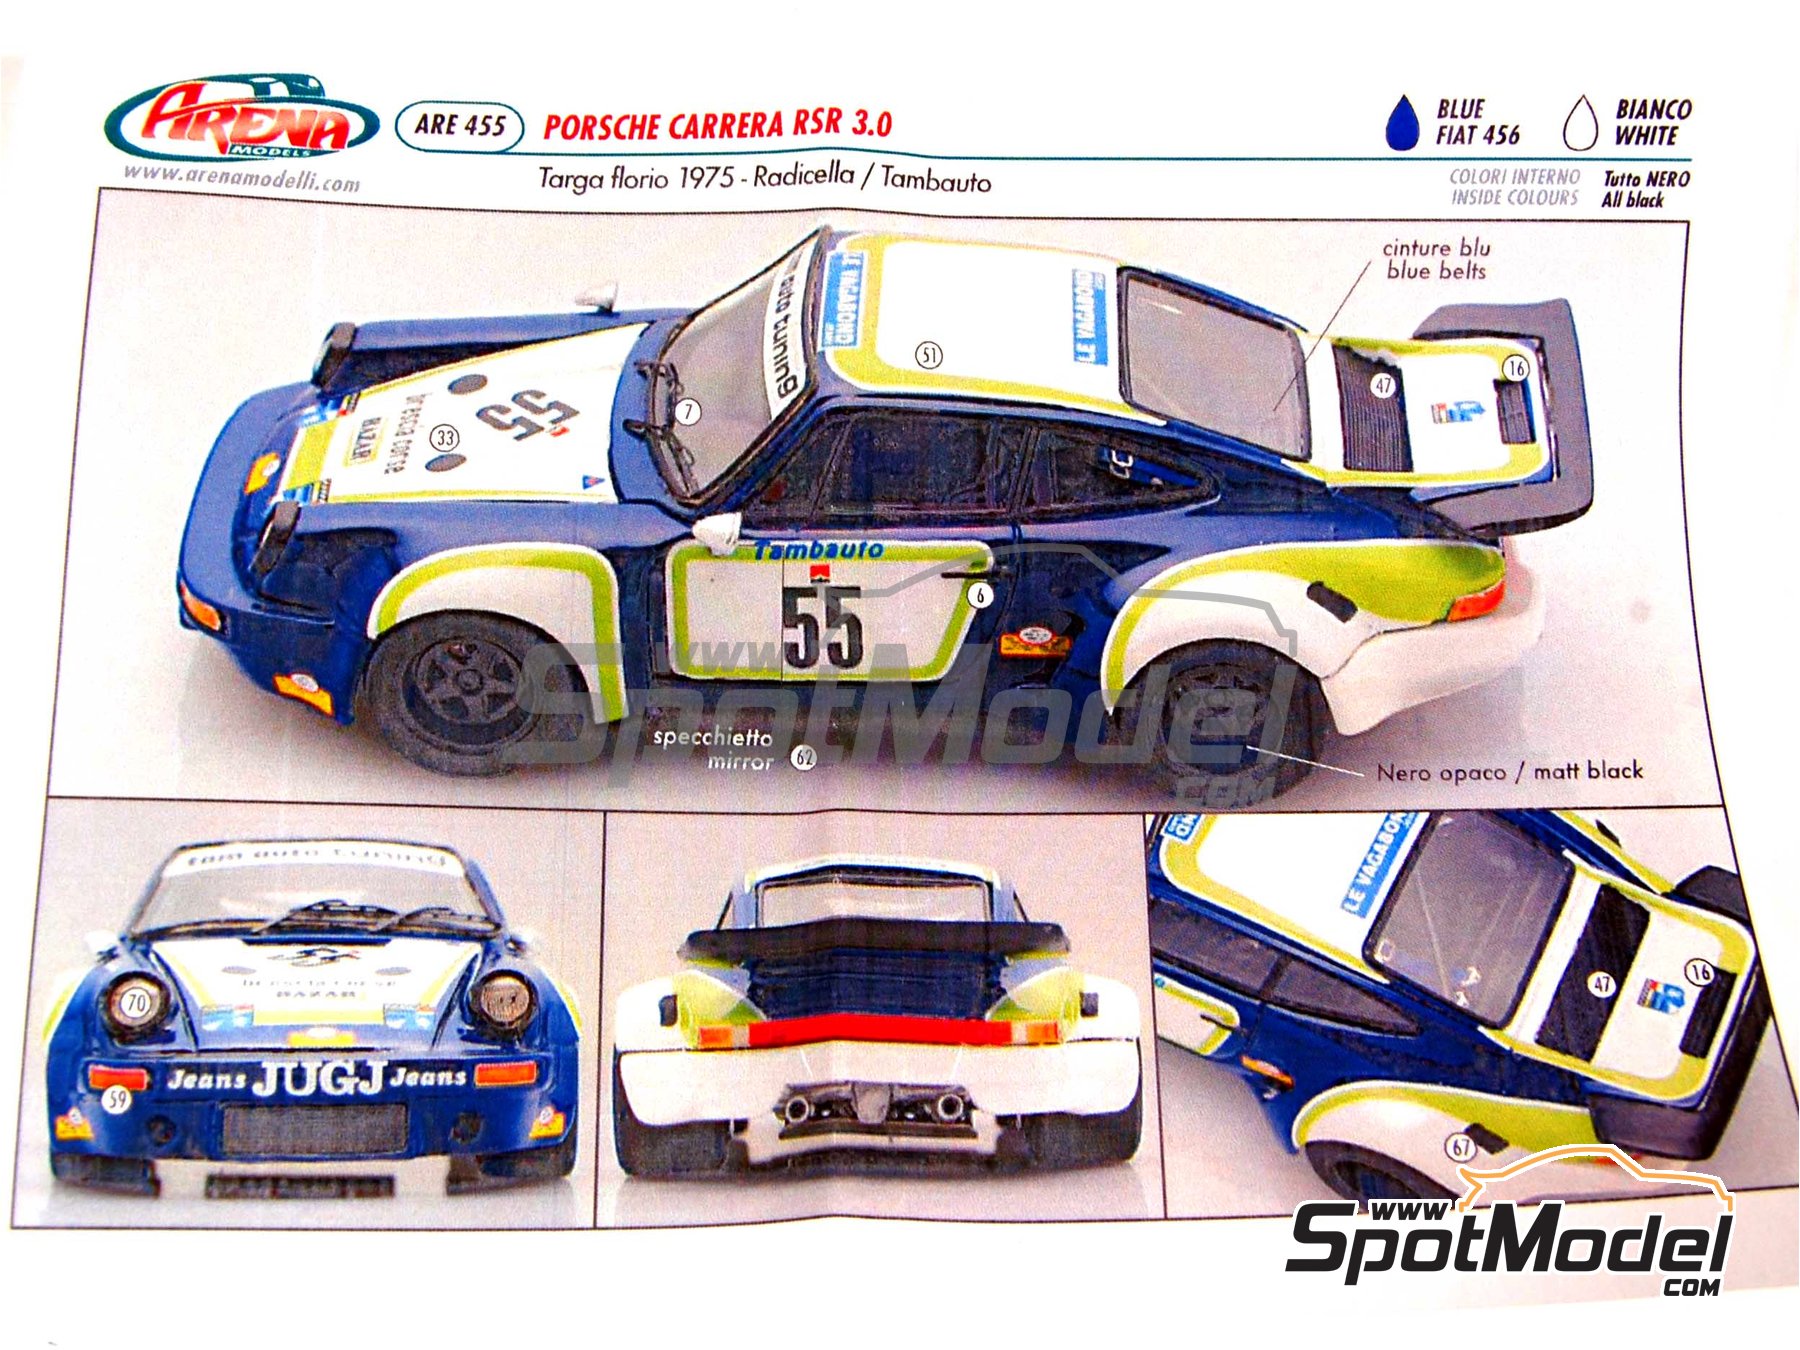 Porsche 911 Carrera RSR sponsored by Le Vagabond Jeans - Targa Florio 1975.  Model car kit in 1/43 scale manufactured by Arena Modelli (ref. ARE455)